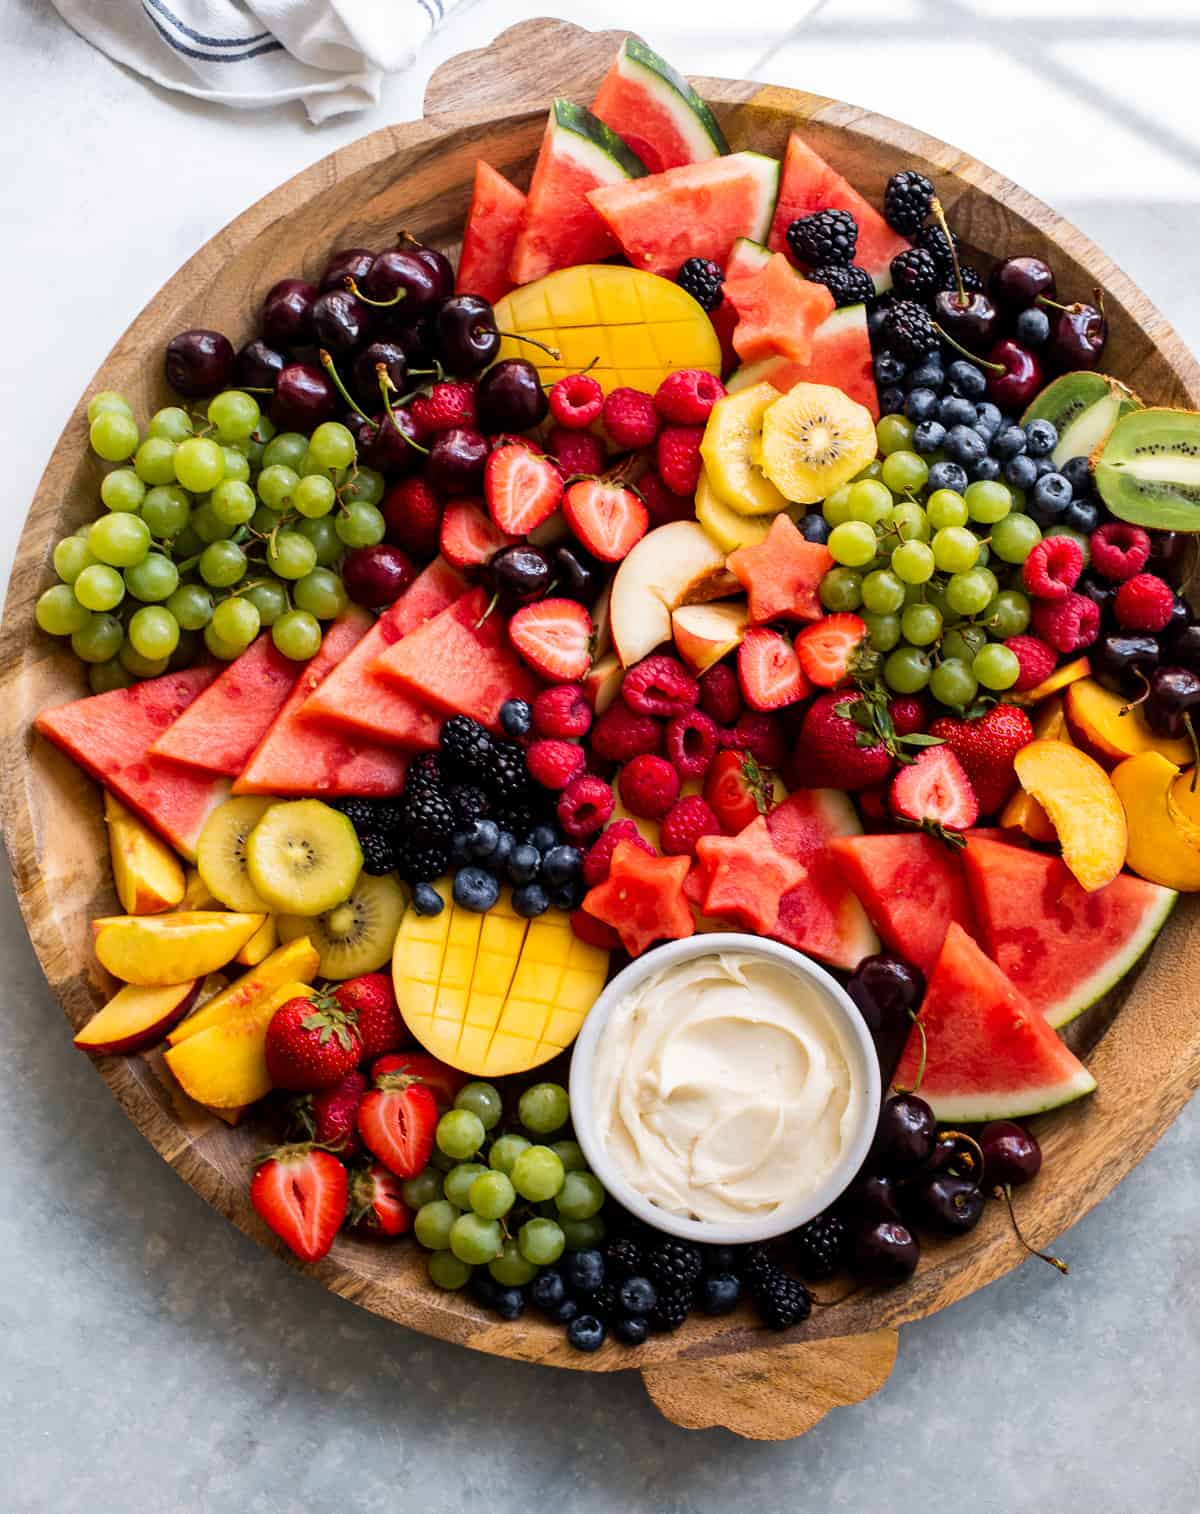 20 Mouth-Watering Fruit Platter Ideas for Your Next Brunch